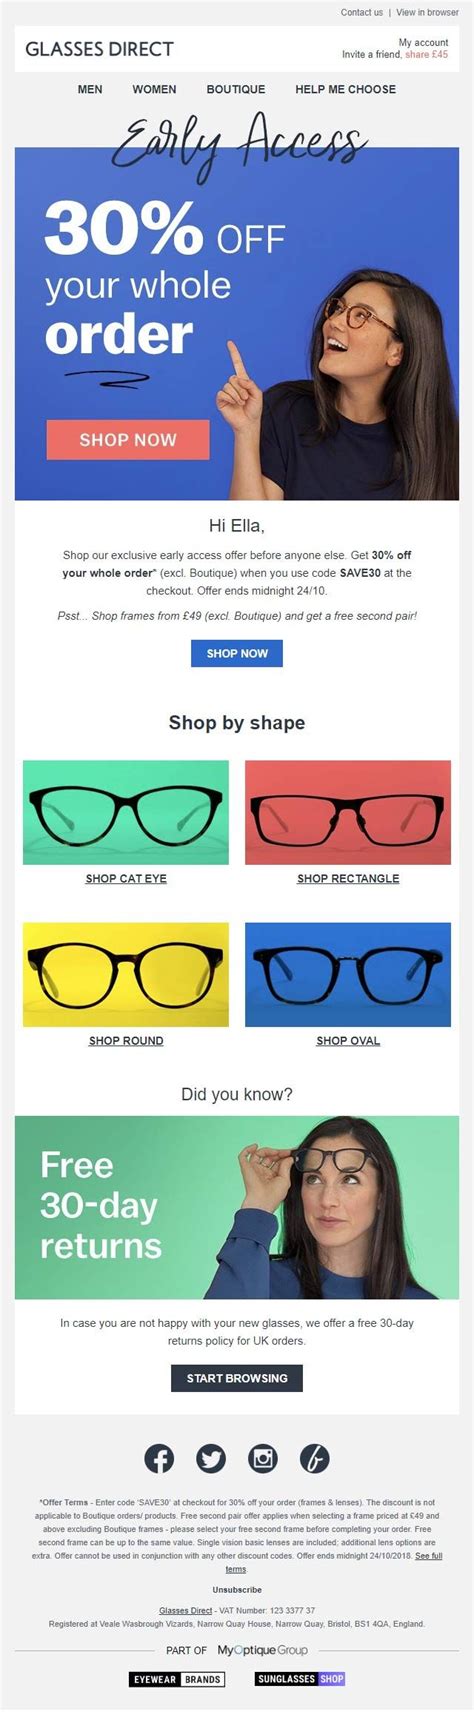 Personalized Email With Discount Code From Glasses Direct